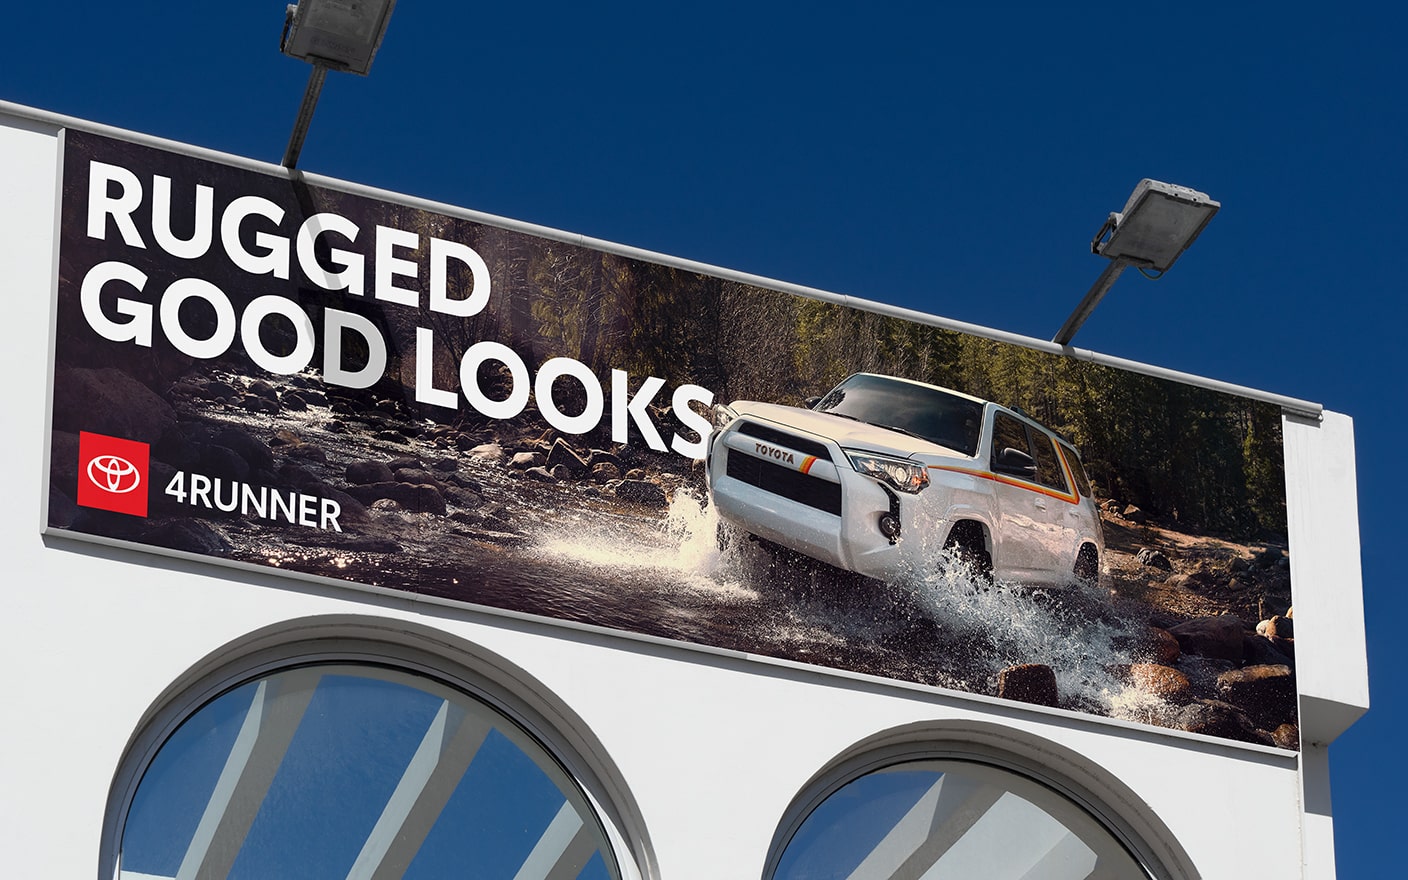 An out-of-home billboard shows a Sequoia off-roading through a creek. The large headline is in all caps reading “RUGGED GOOD LOOKS.”